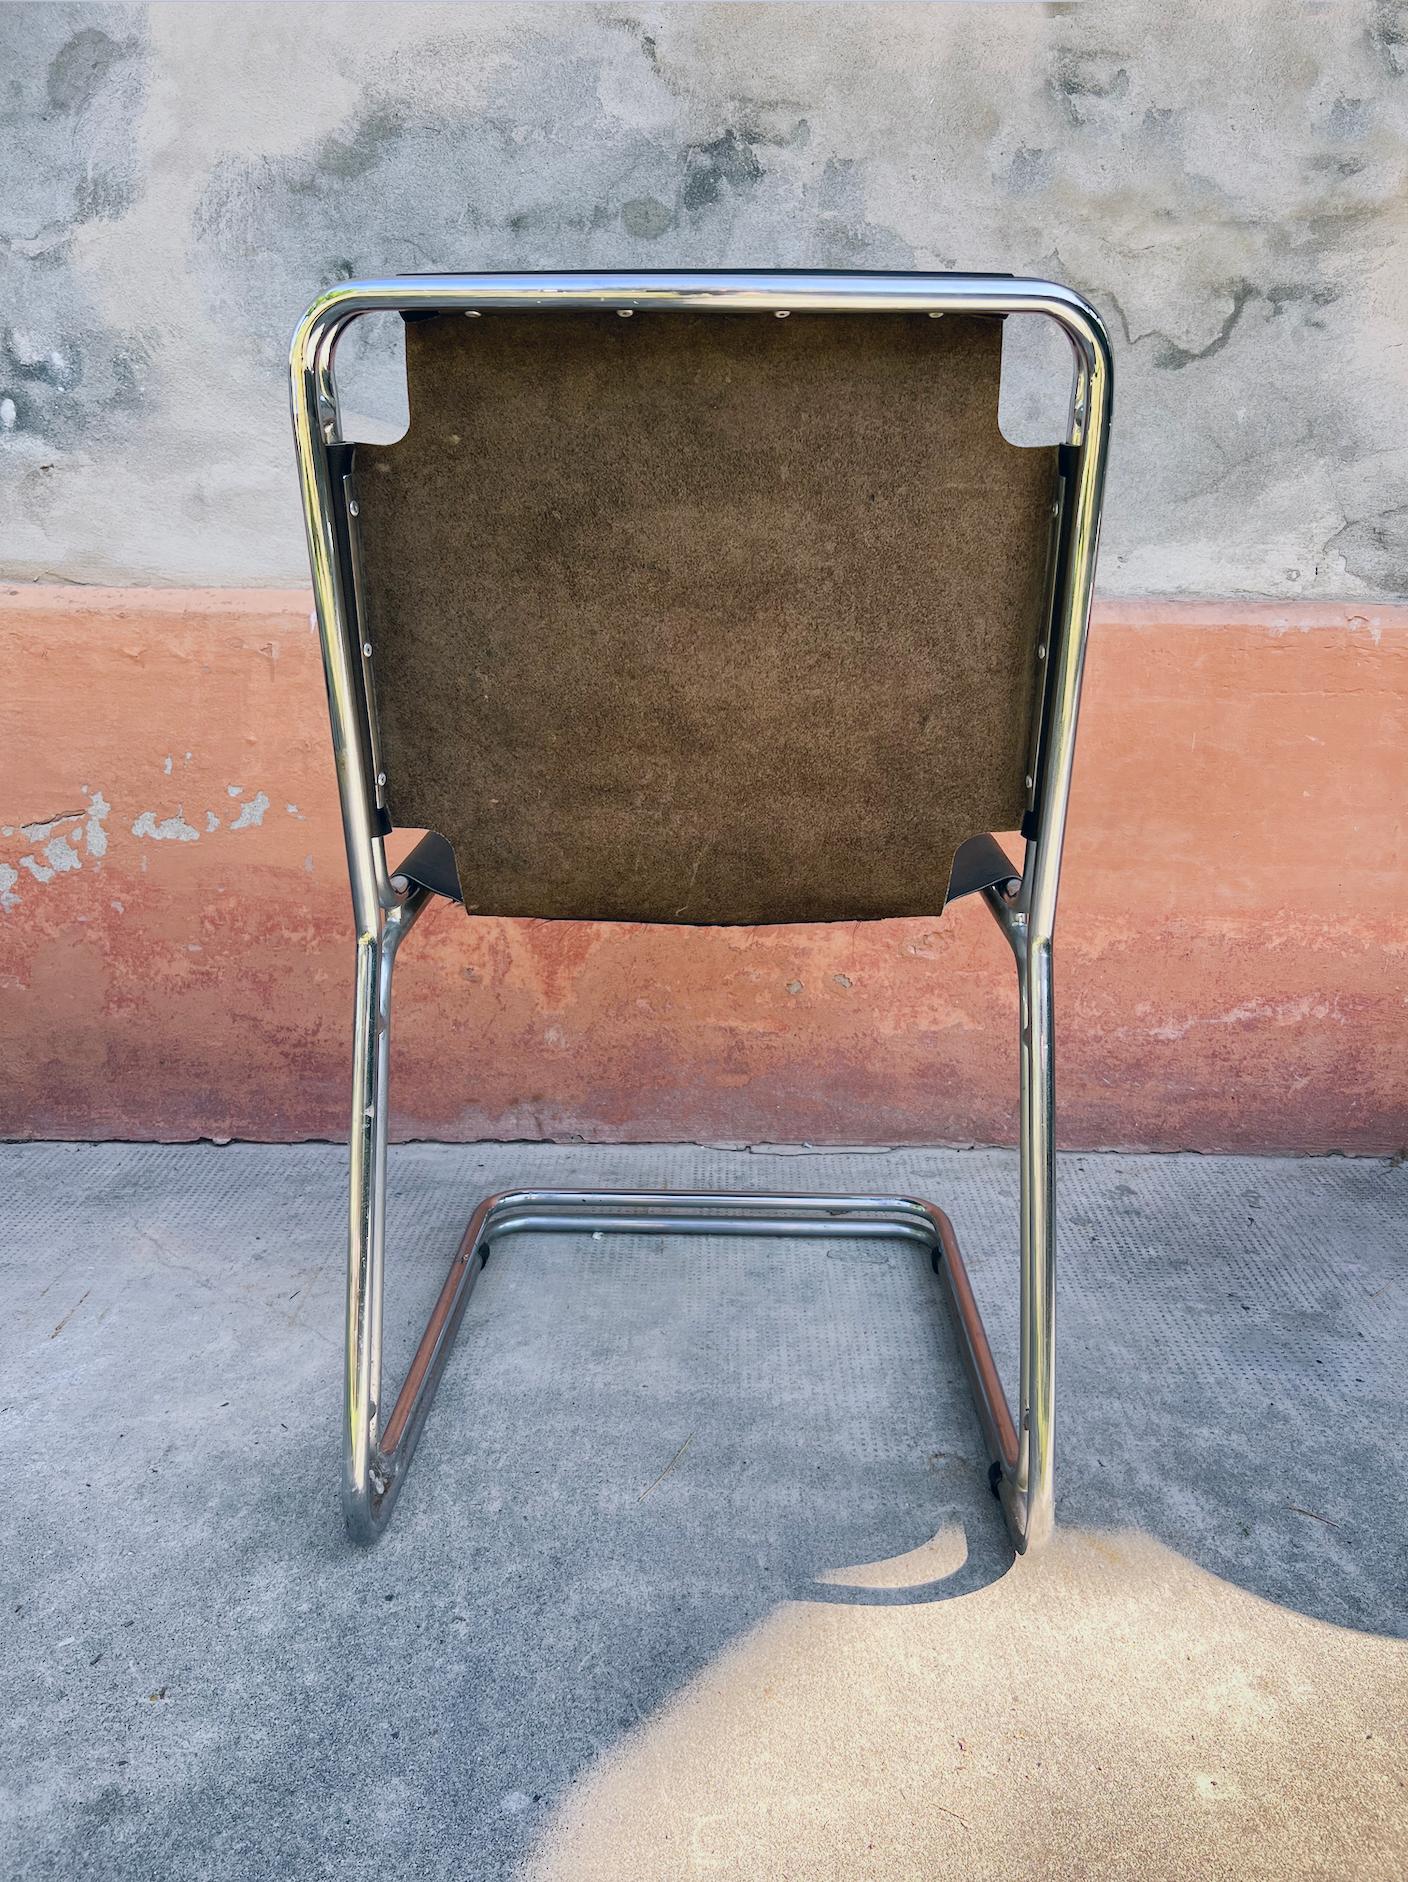 Chrome and leather Italian 1970s chairs

Excellent Condition.